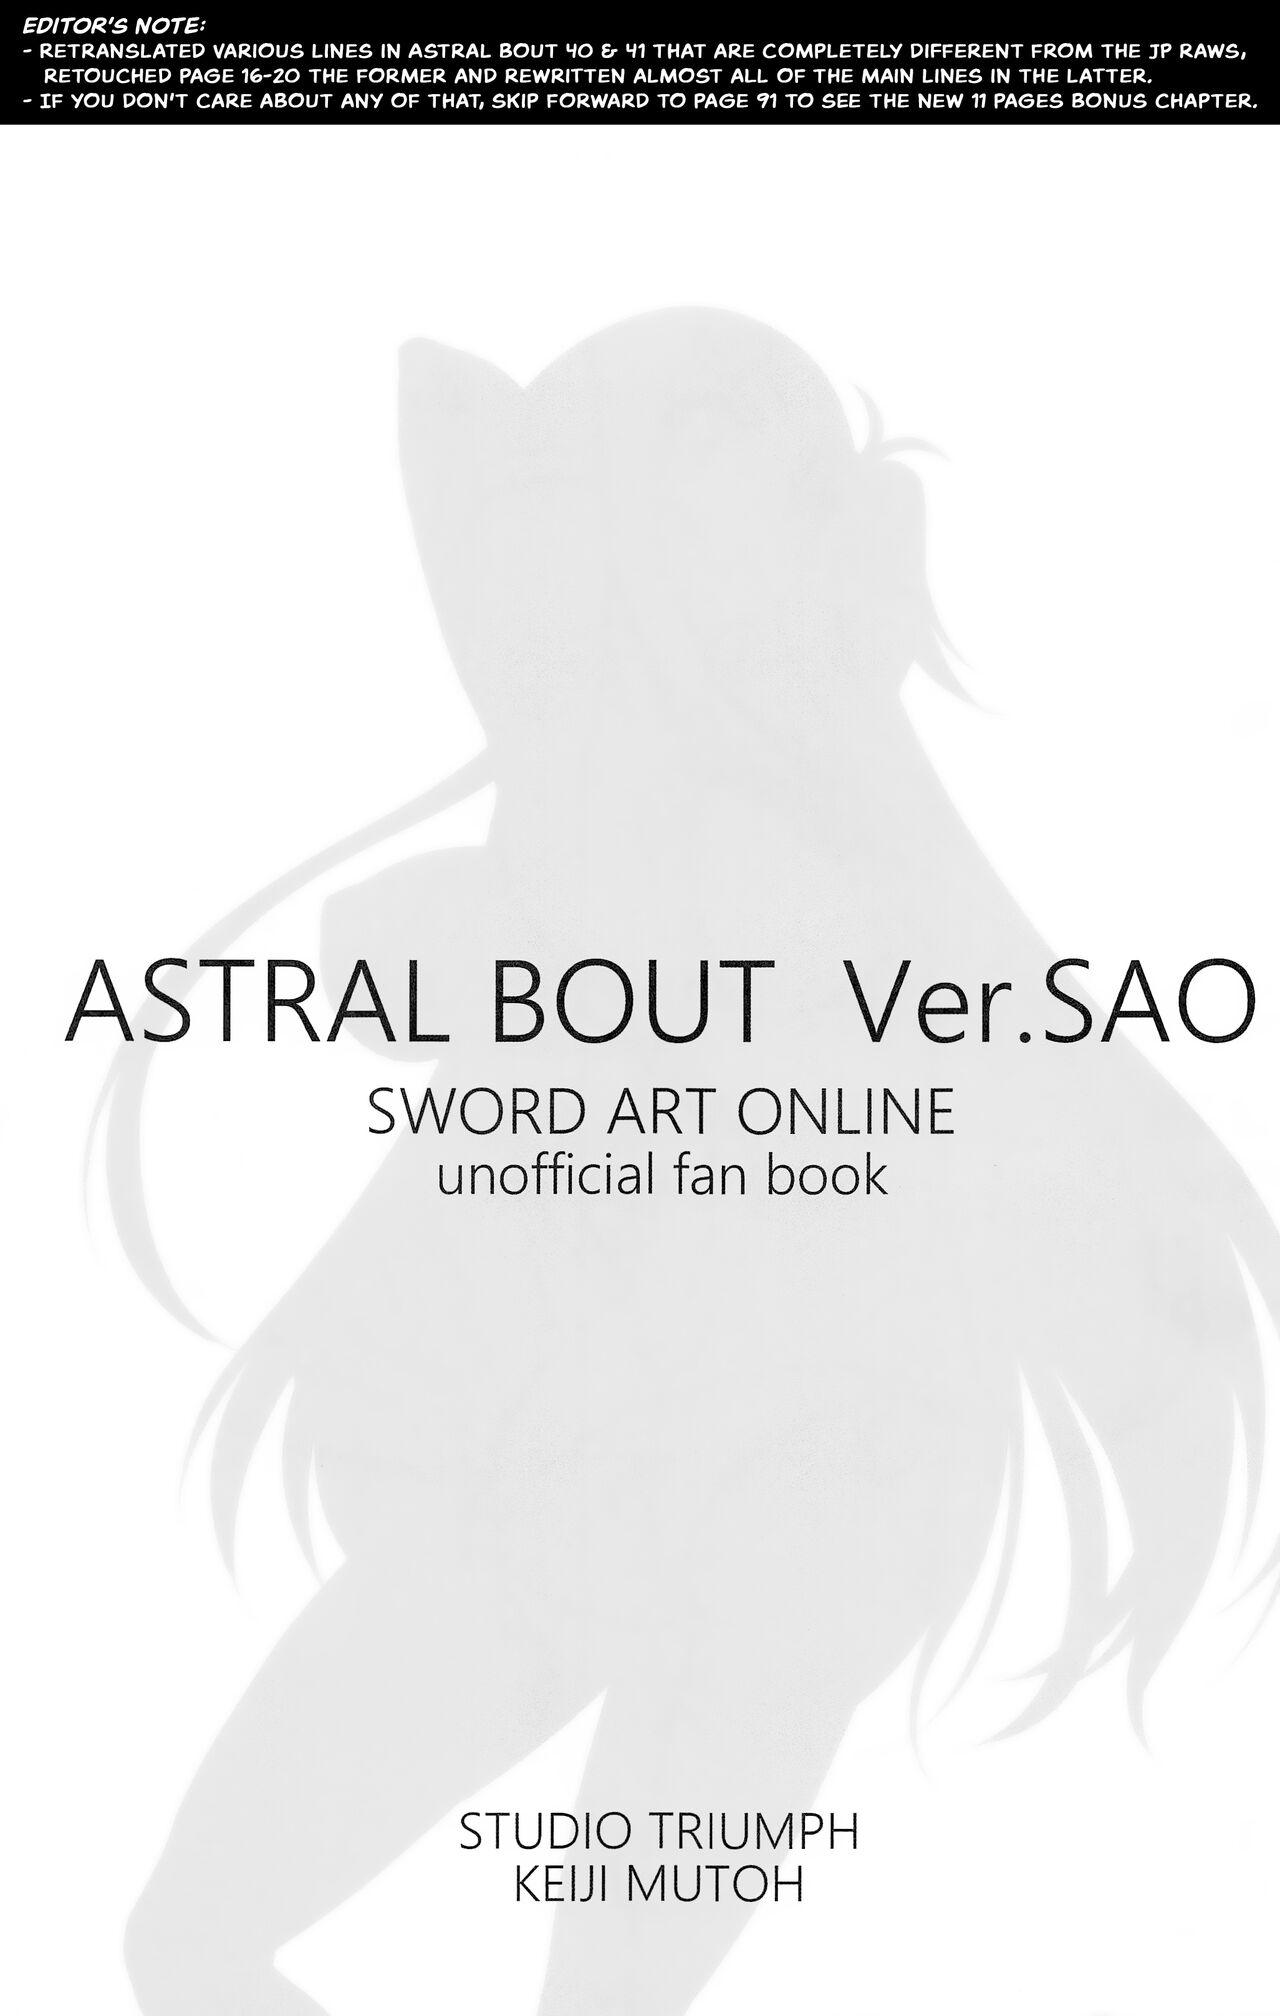 Lady Astral Bout Ver. SAO - Sword art online Feet - Page 2